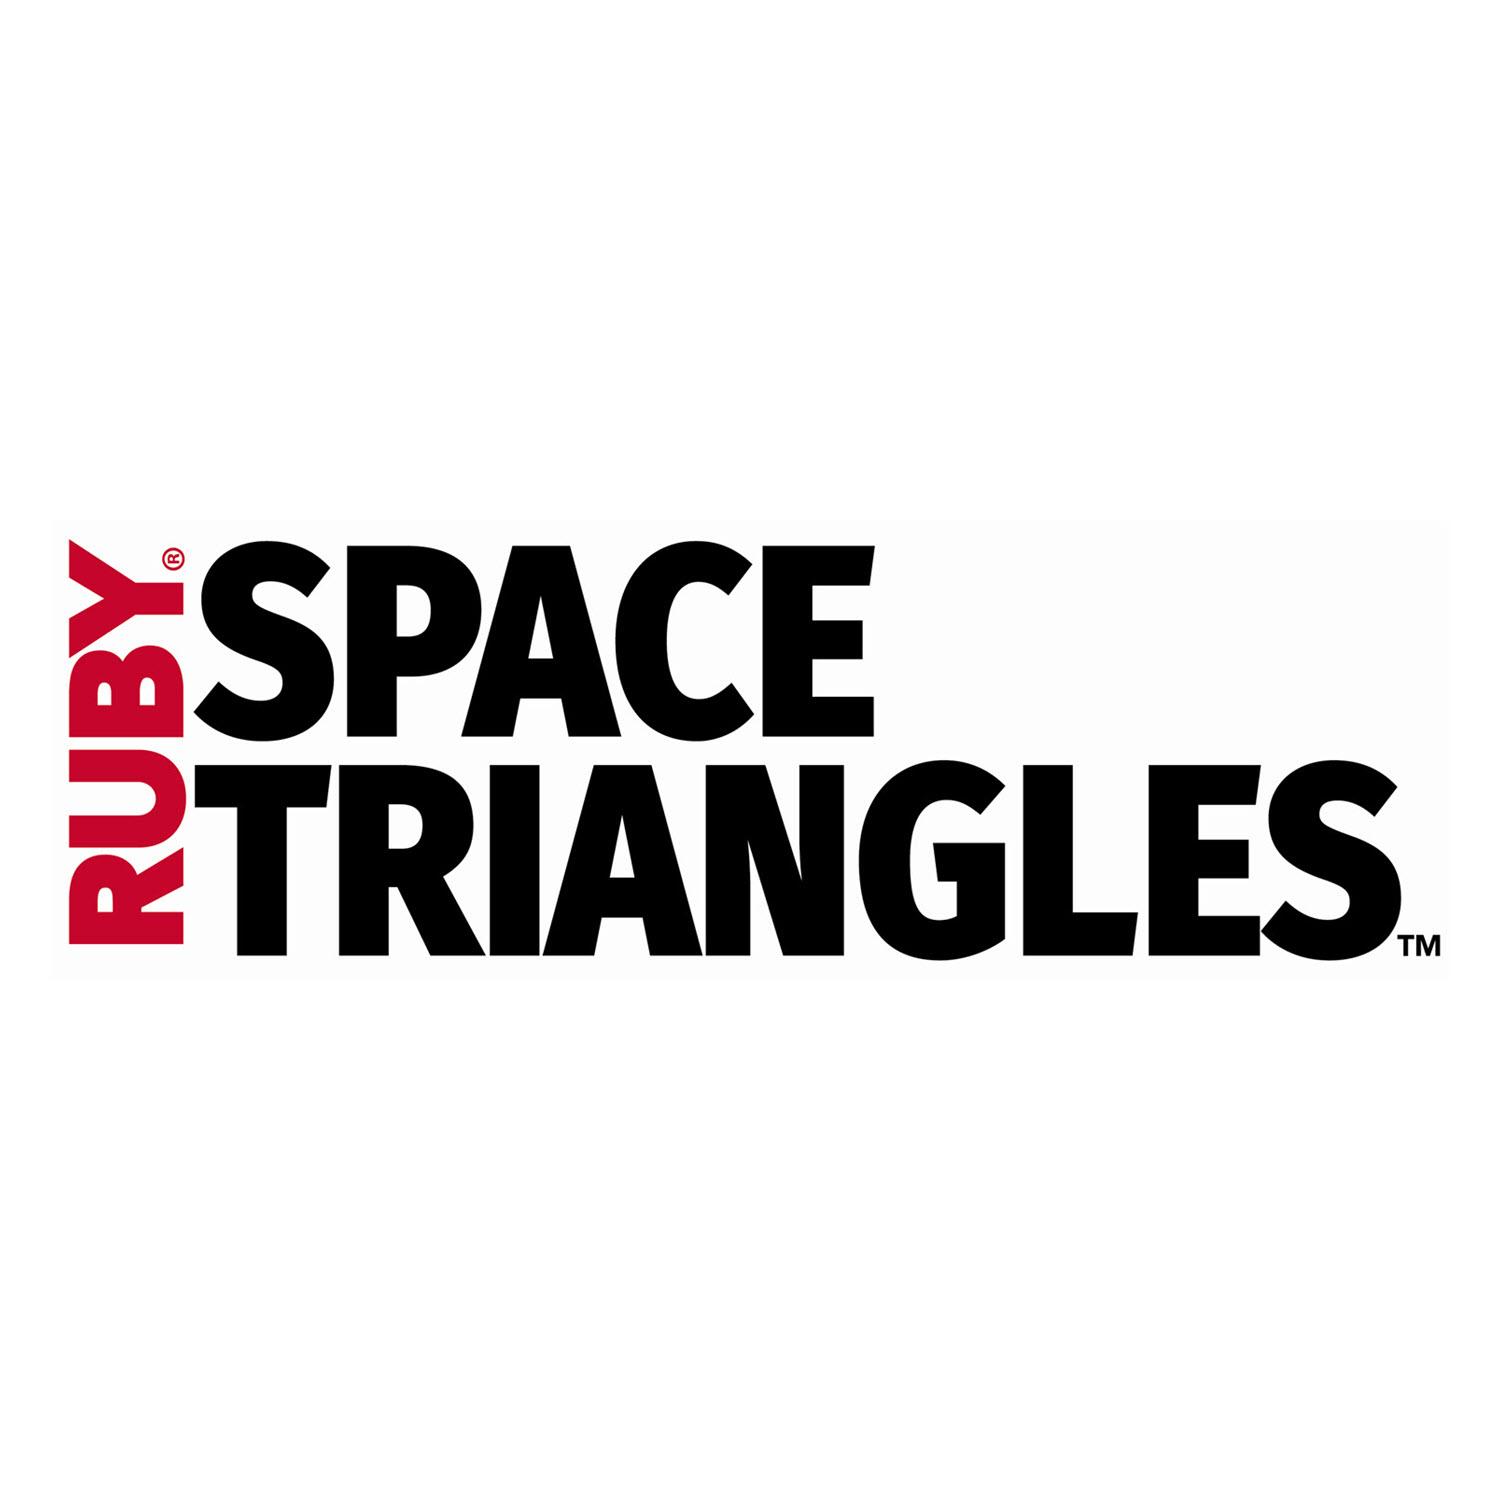 Ruby Space Triangles